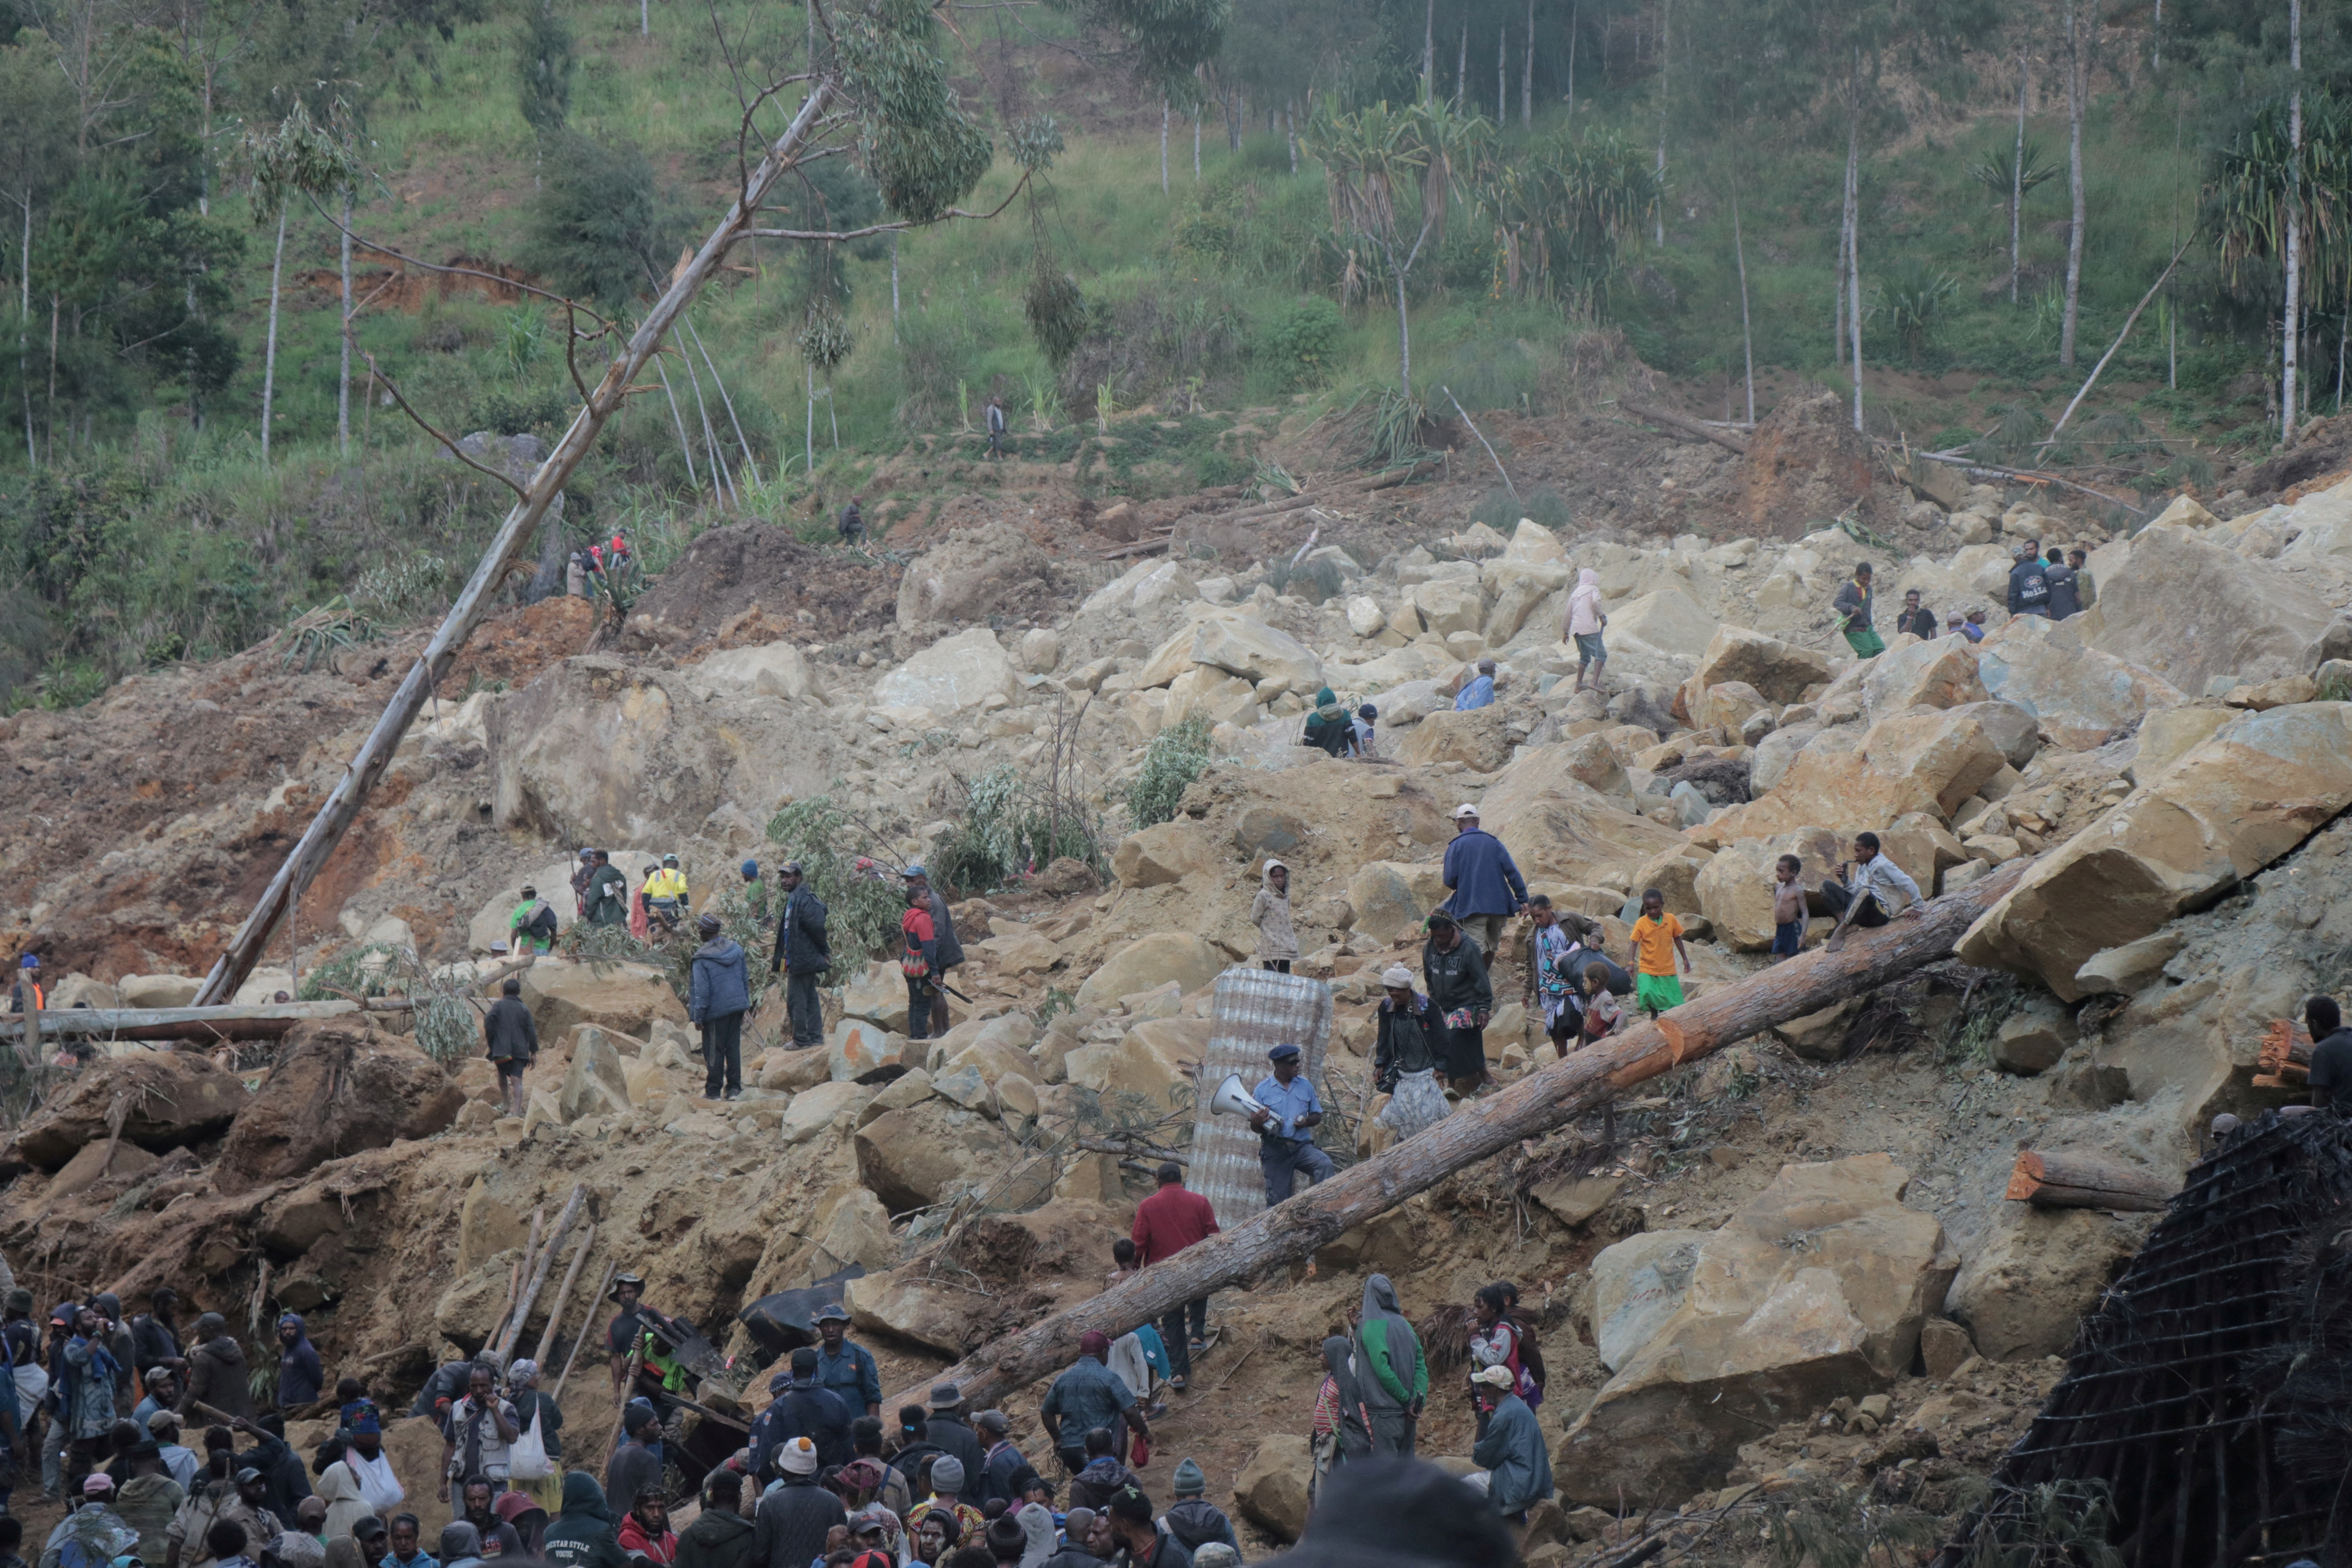 image More than 2,000 could be buried in Papua New Guinea landslide